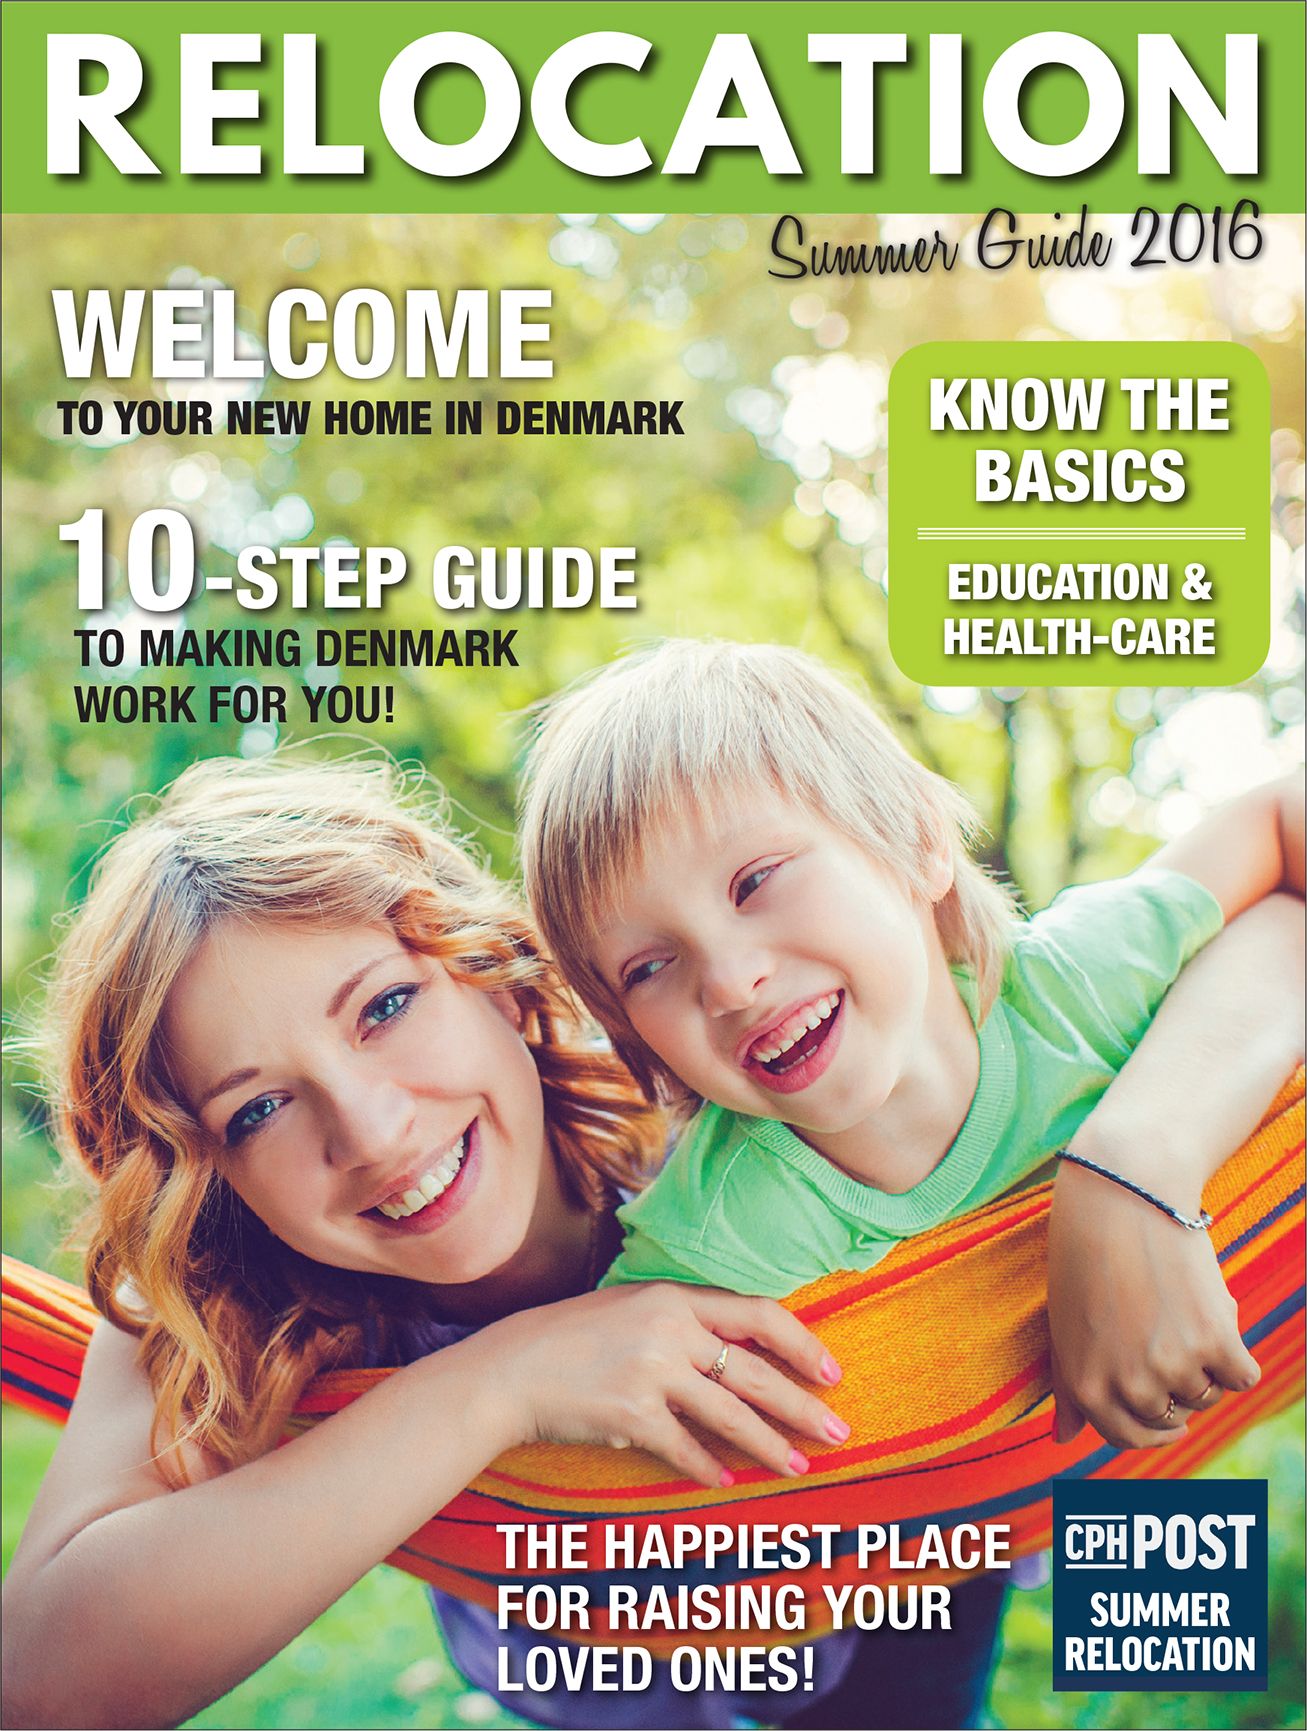 Relocation Summer Guide 2016 is out now!